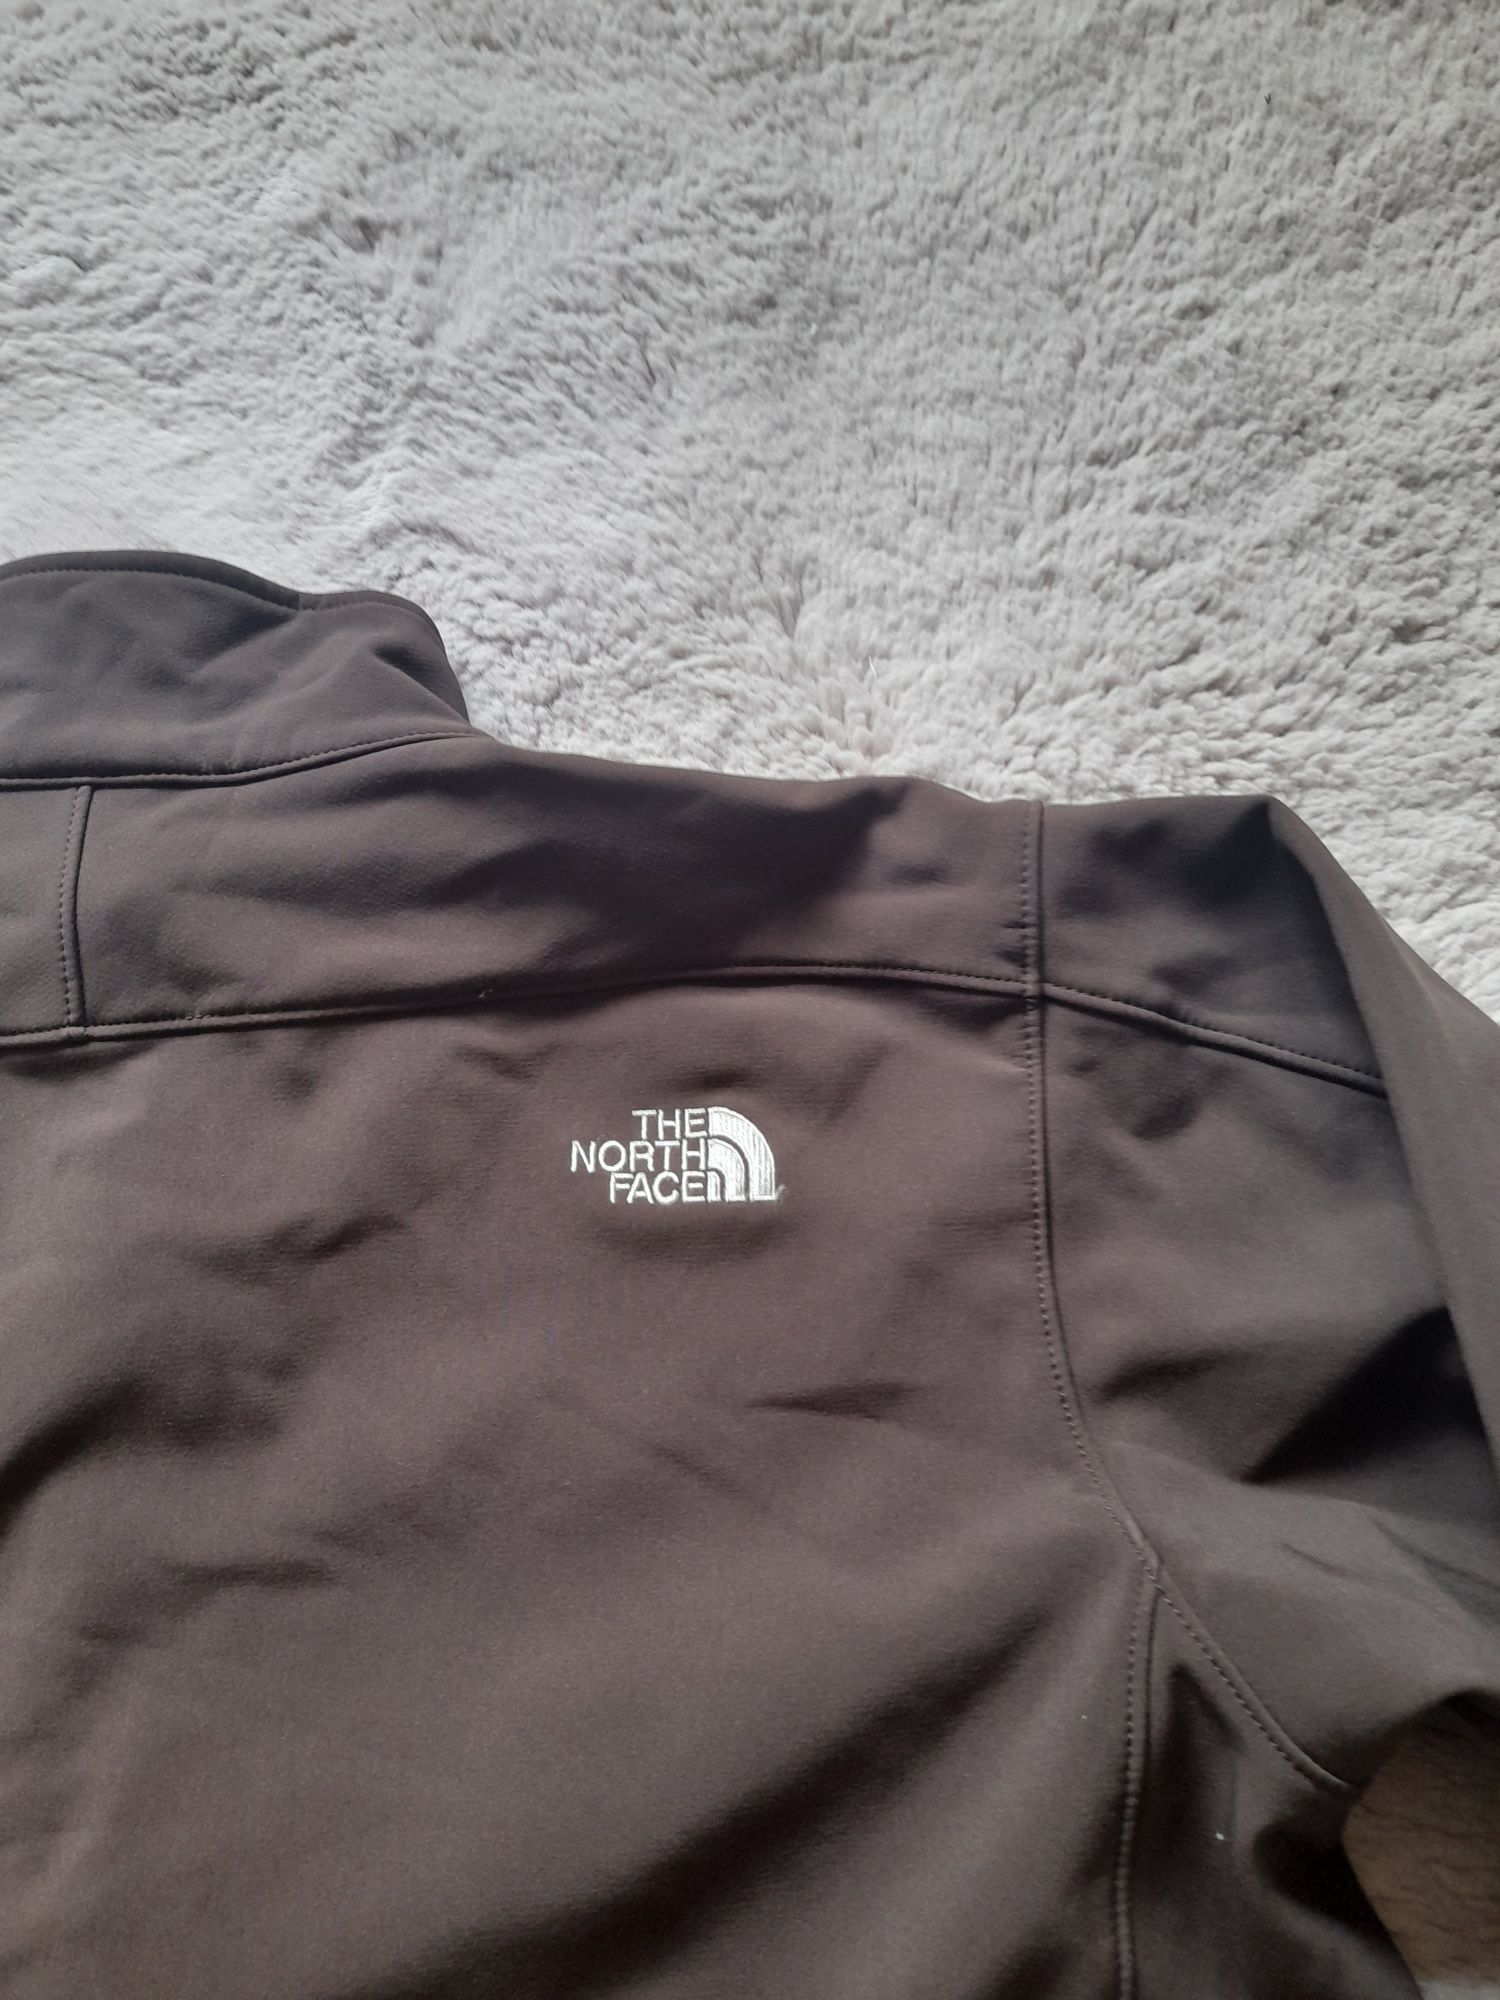 The north face APEX мъжко яке XL размер.